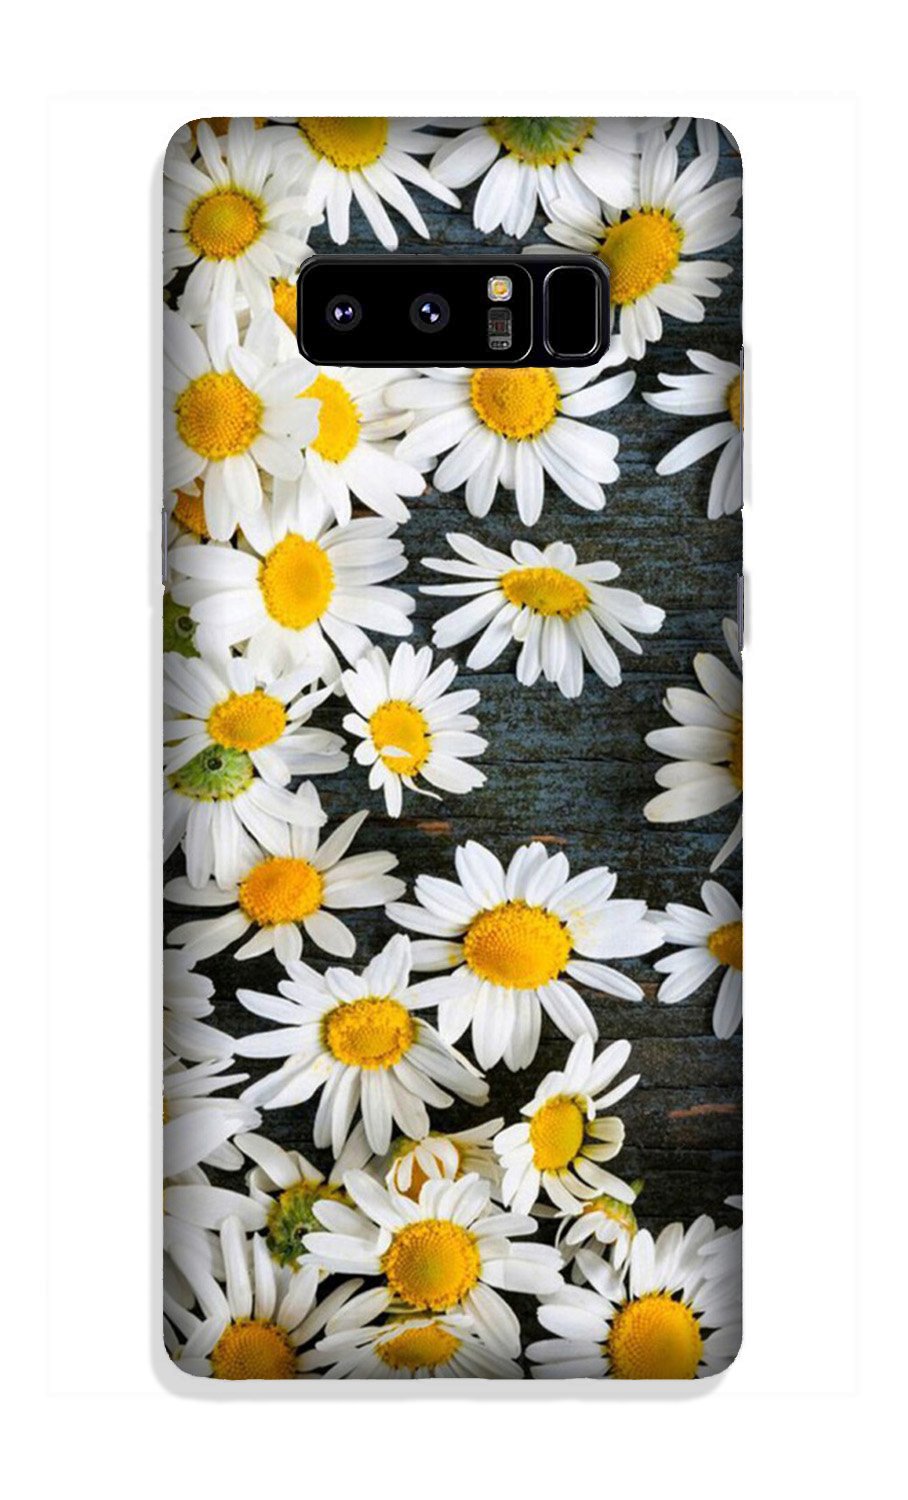 White flowers2 Case for Galaxy Note 8